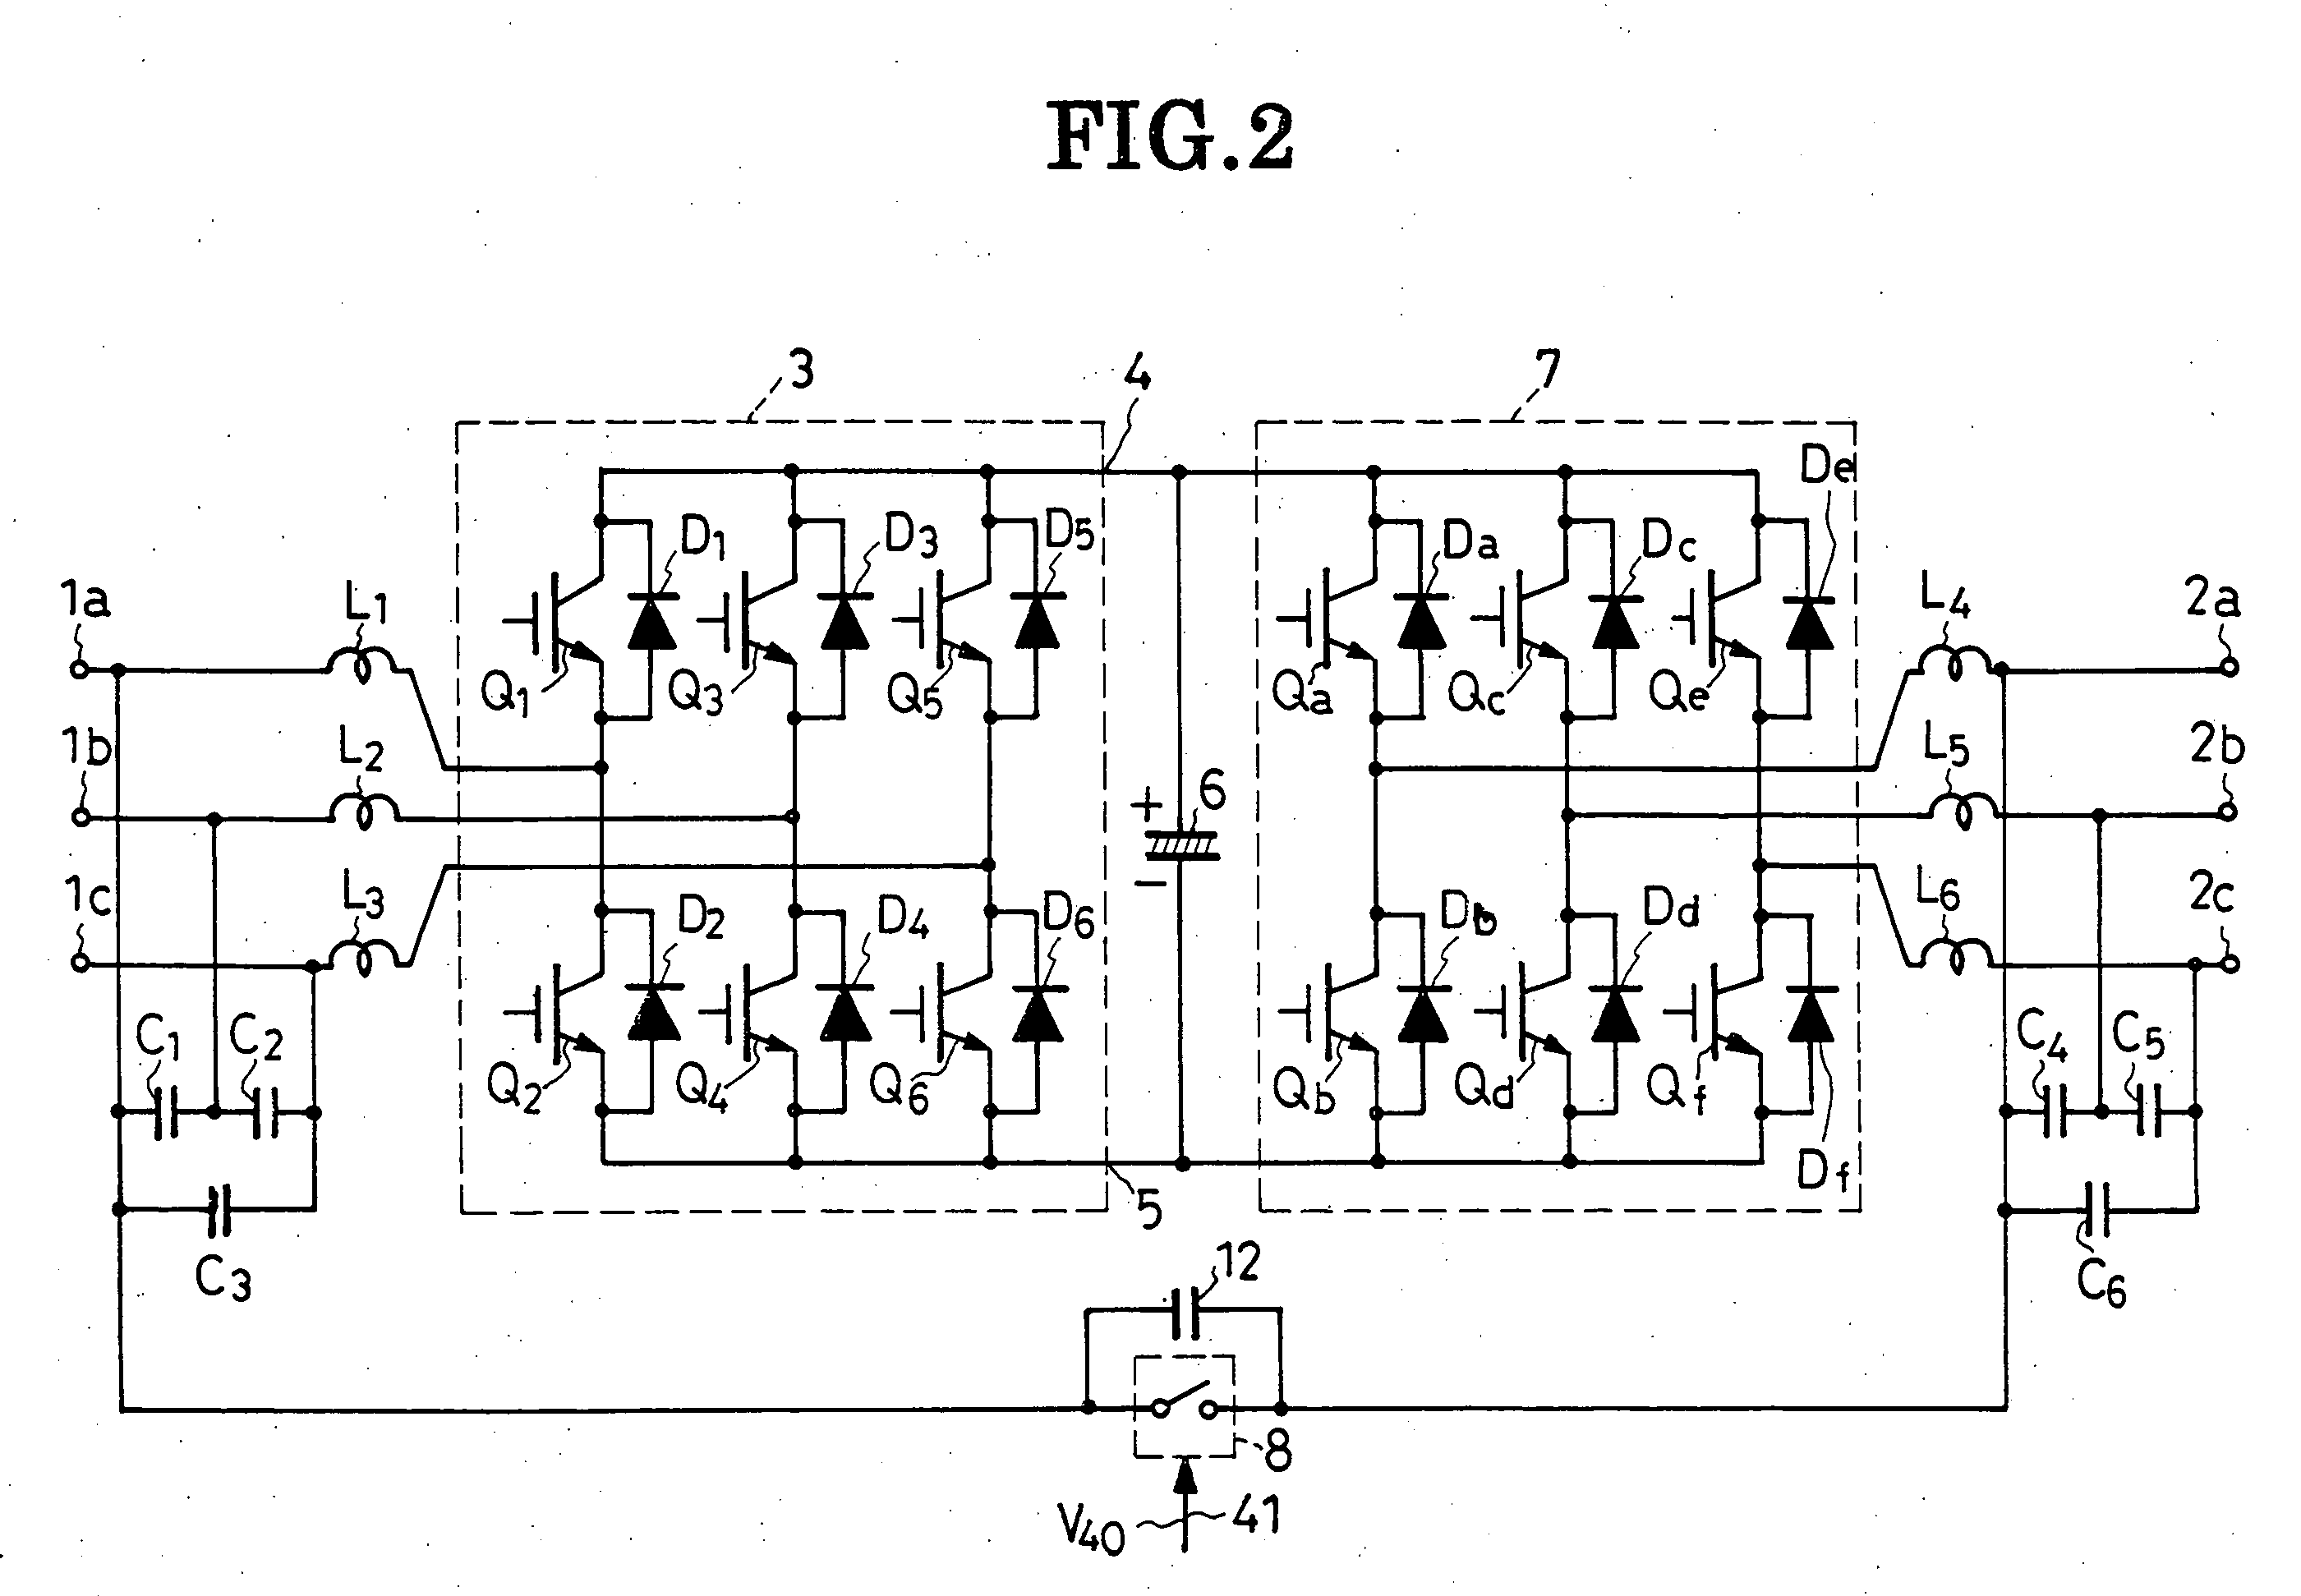 Three-phase ac-to-dc-to-ac converter